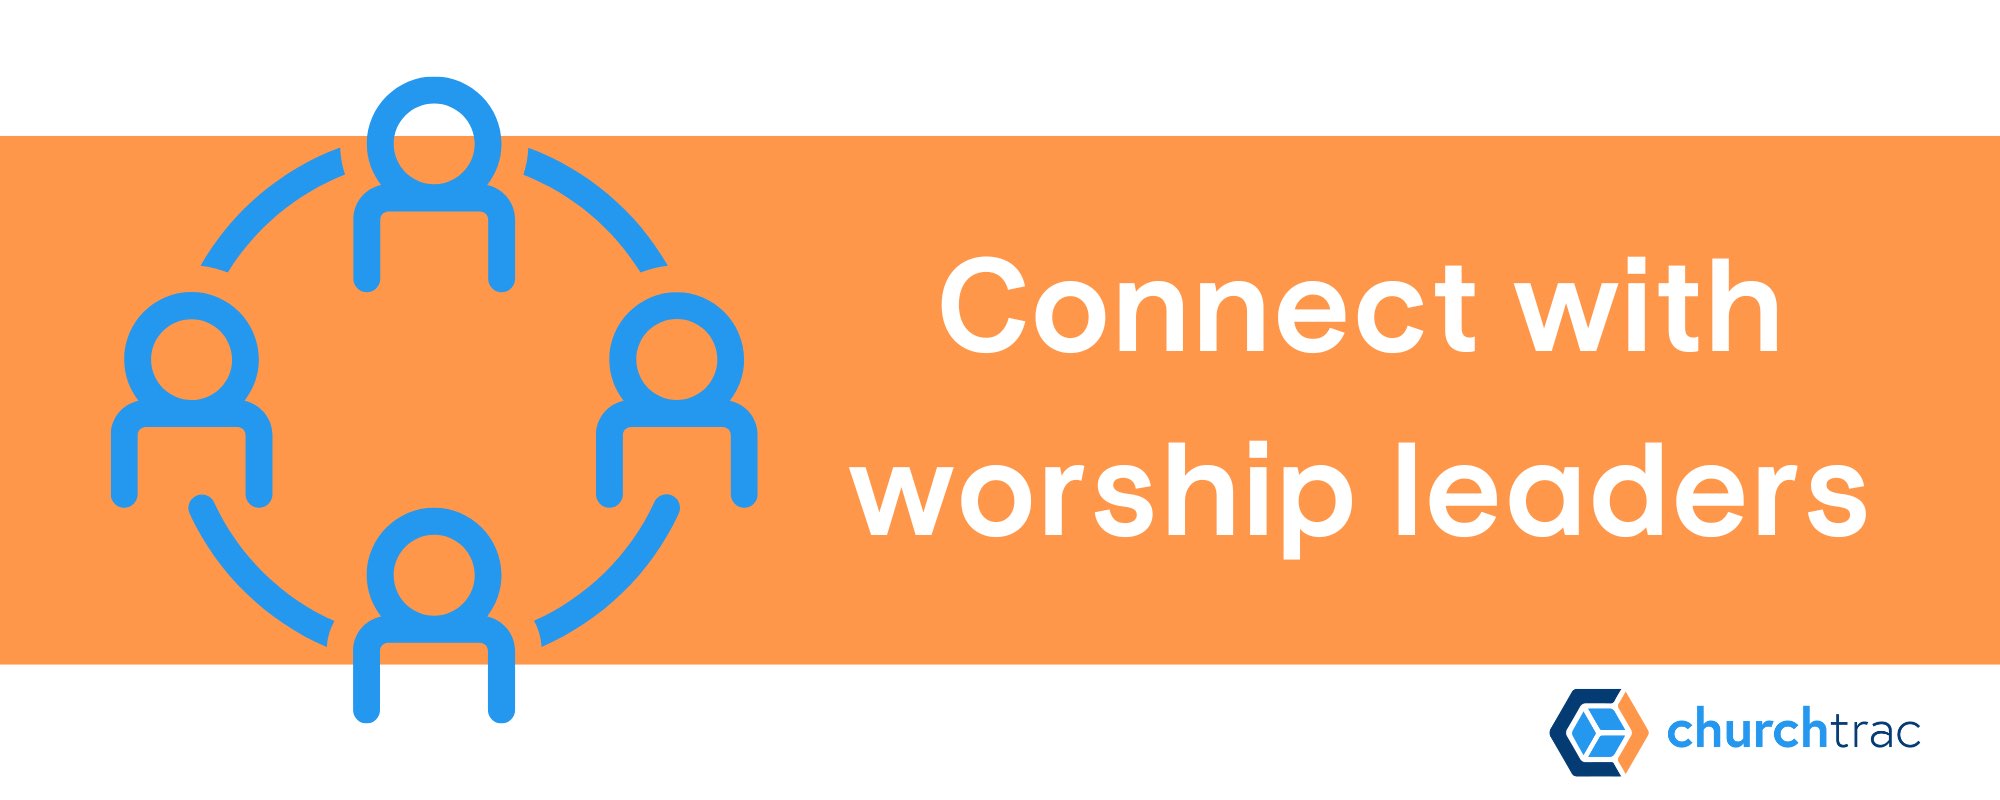 Worship leader podcasts to connect with other worship leaders